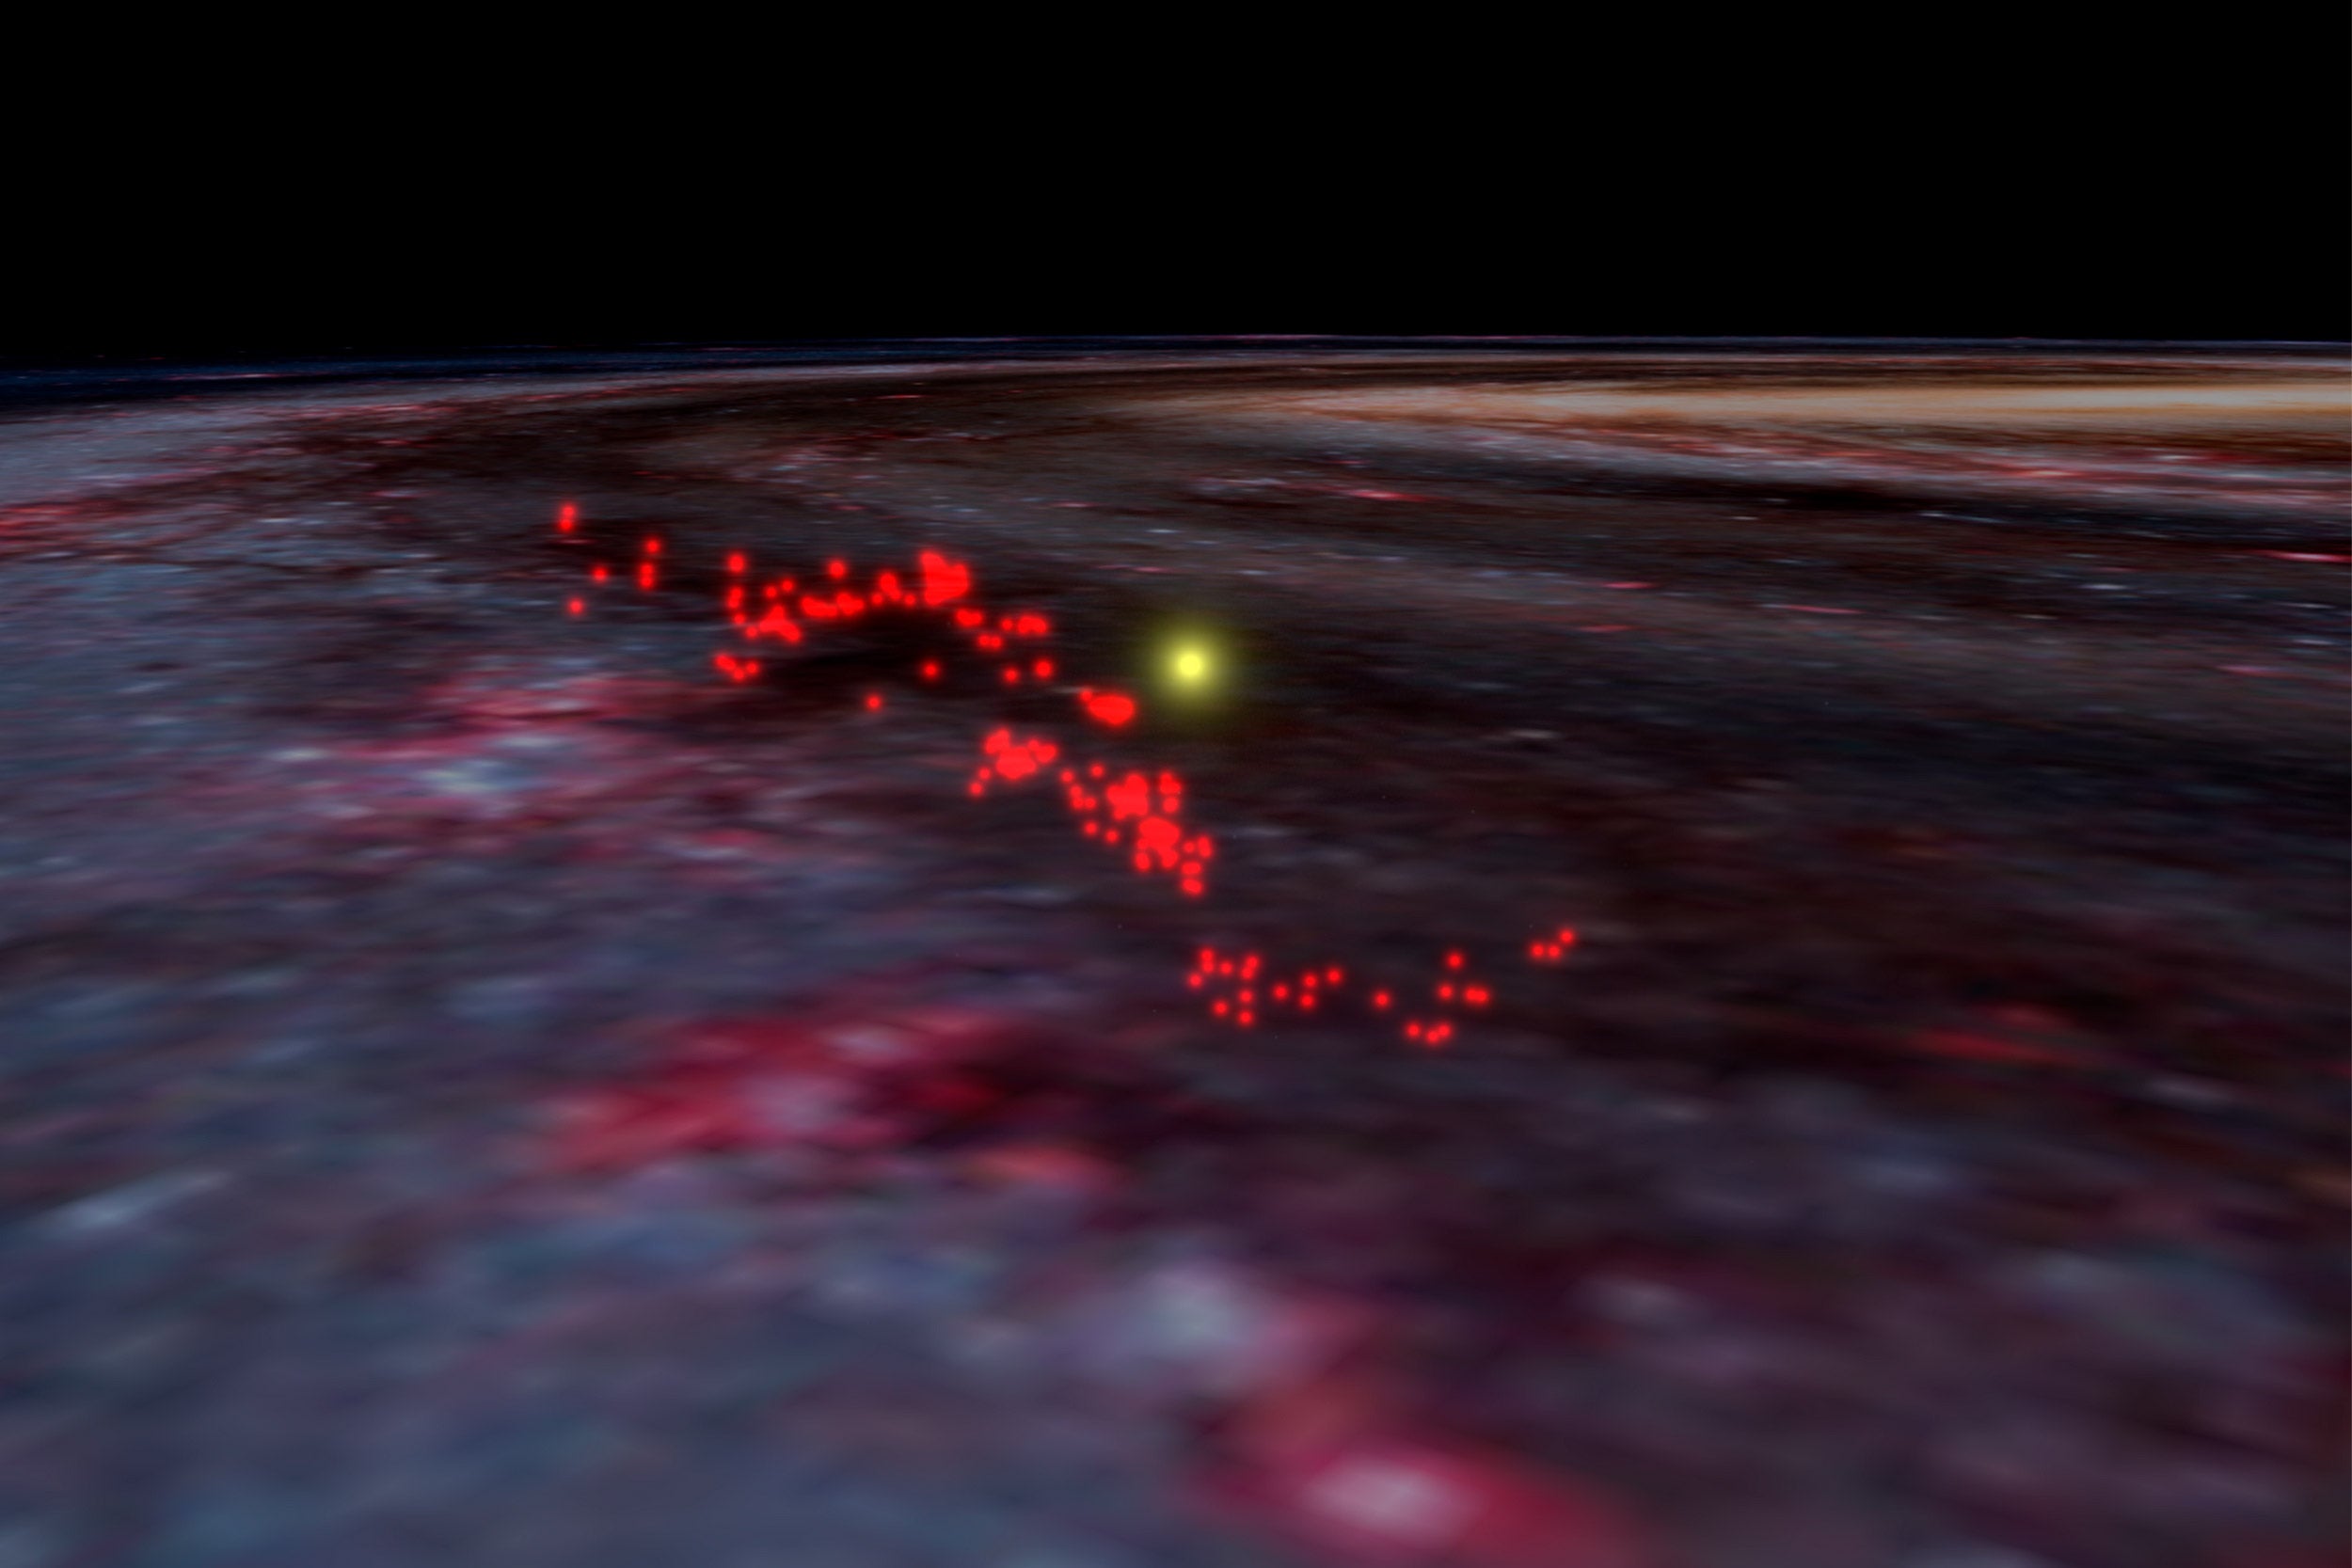 Astronomers discover giant wave-shaped structure in the Milky Way